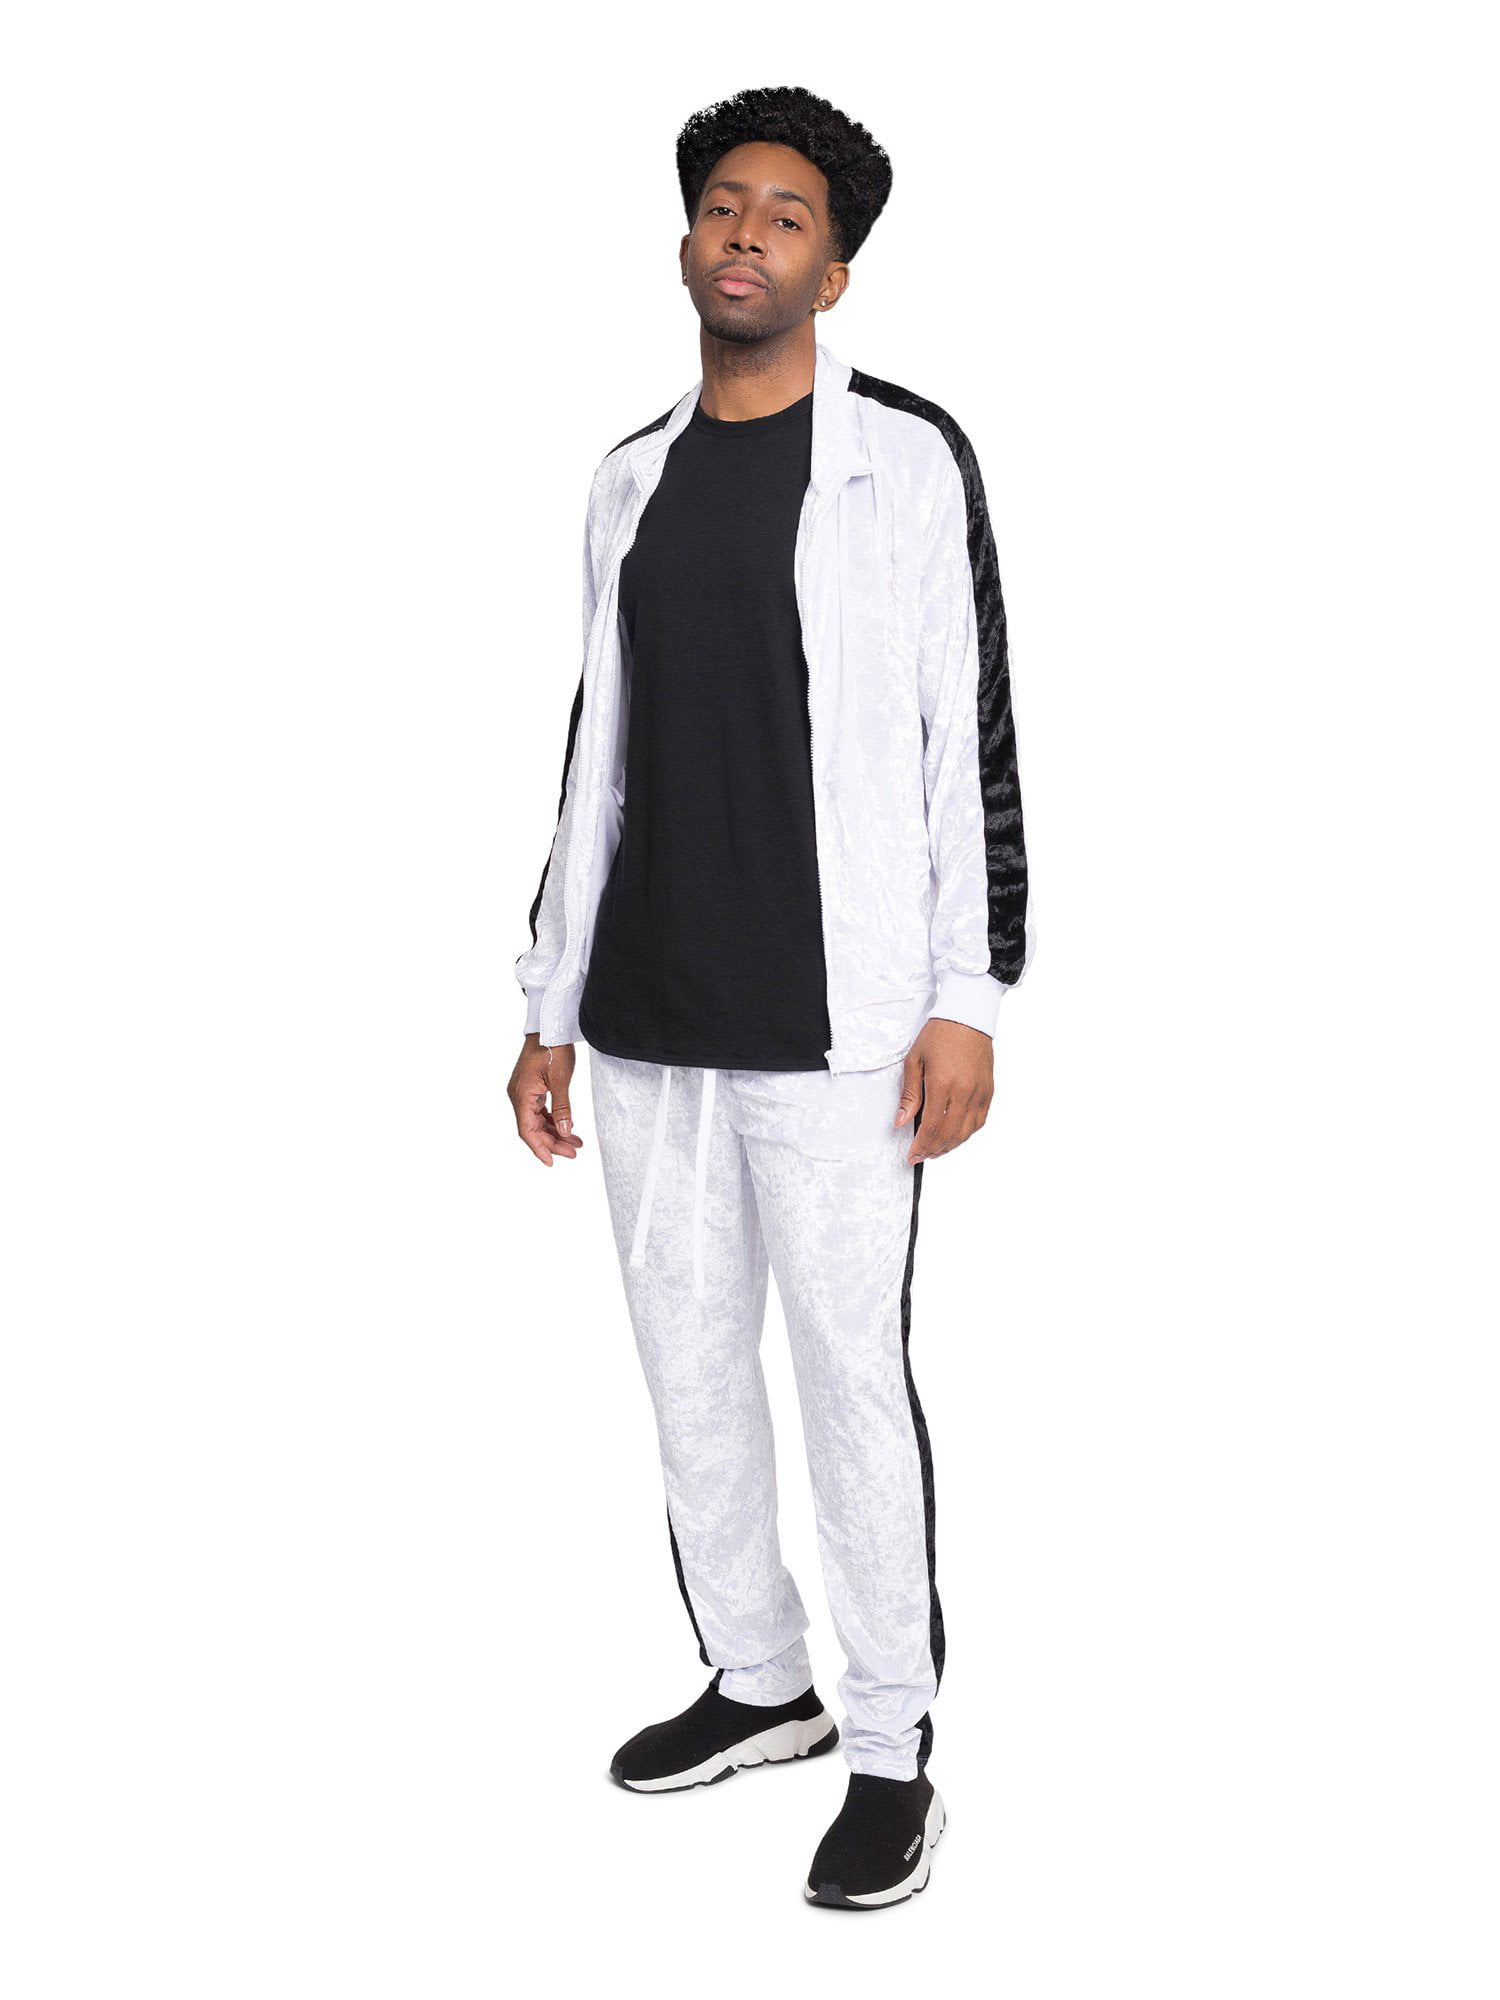 G-Style USA Accented Velour Track Suit